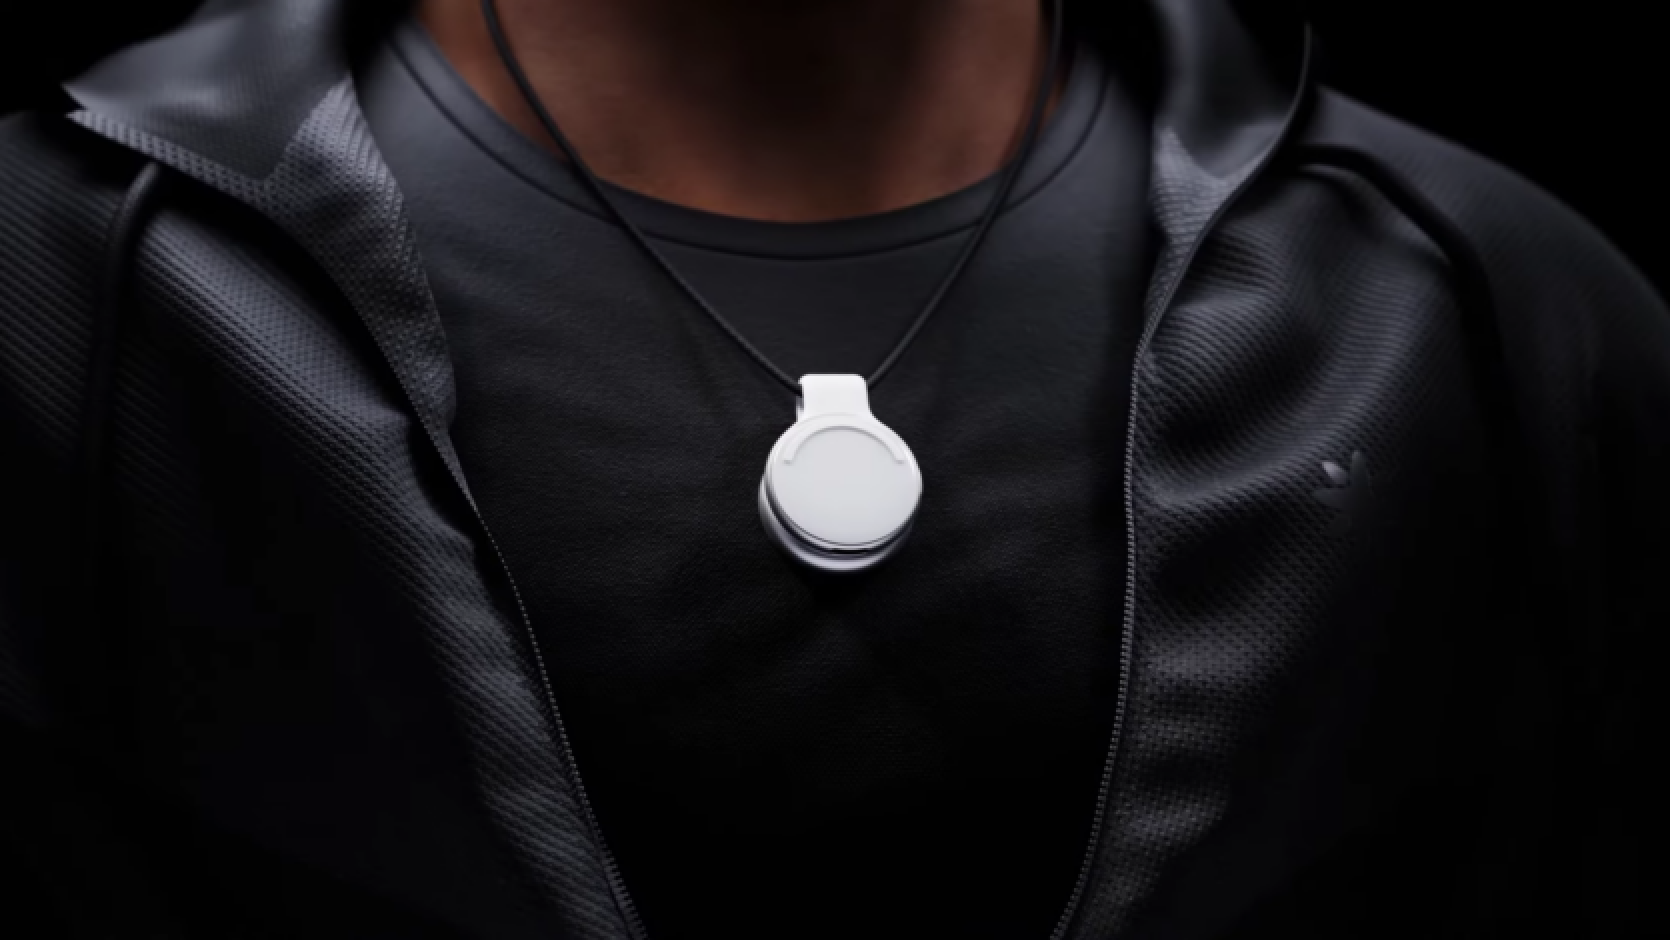 The $99 Pendant smart pendant will remember everything you've been told throughout the day, and AI will analyze it